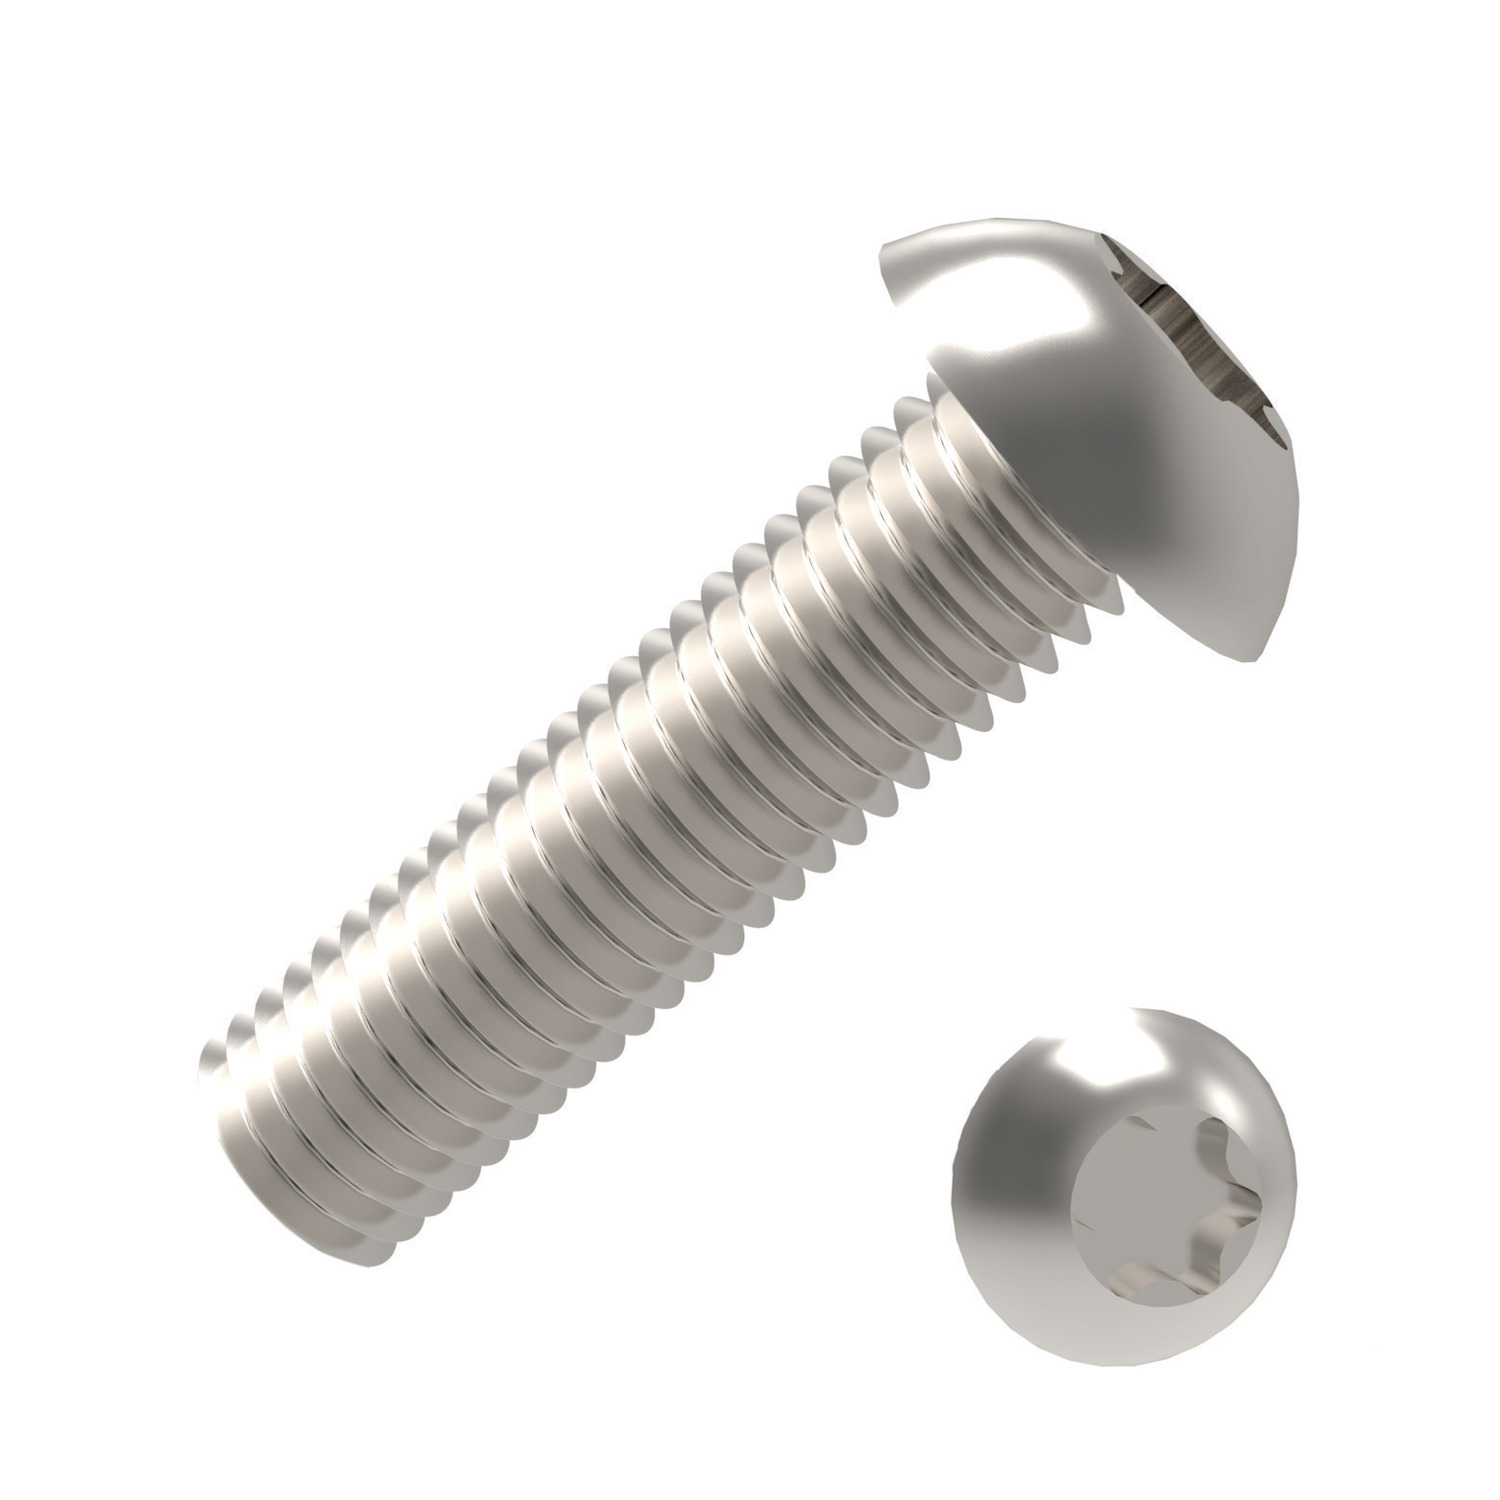 TX Button Screws To ISO 7380. Threaded within 2,5 x pitch of head. Made from A2 Stainless Steel.